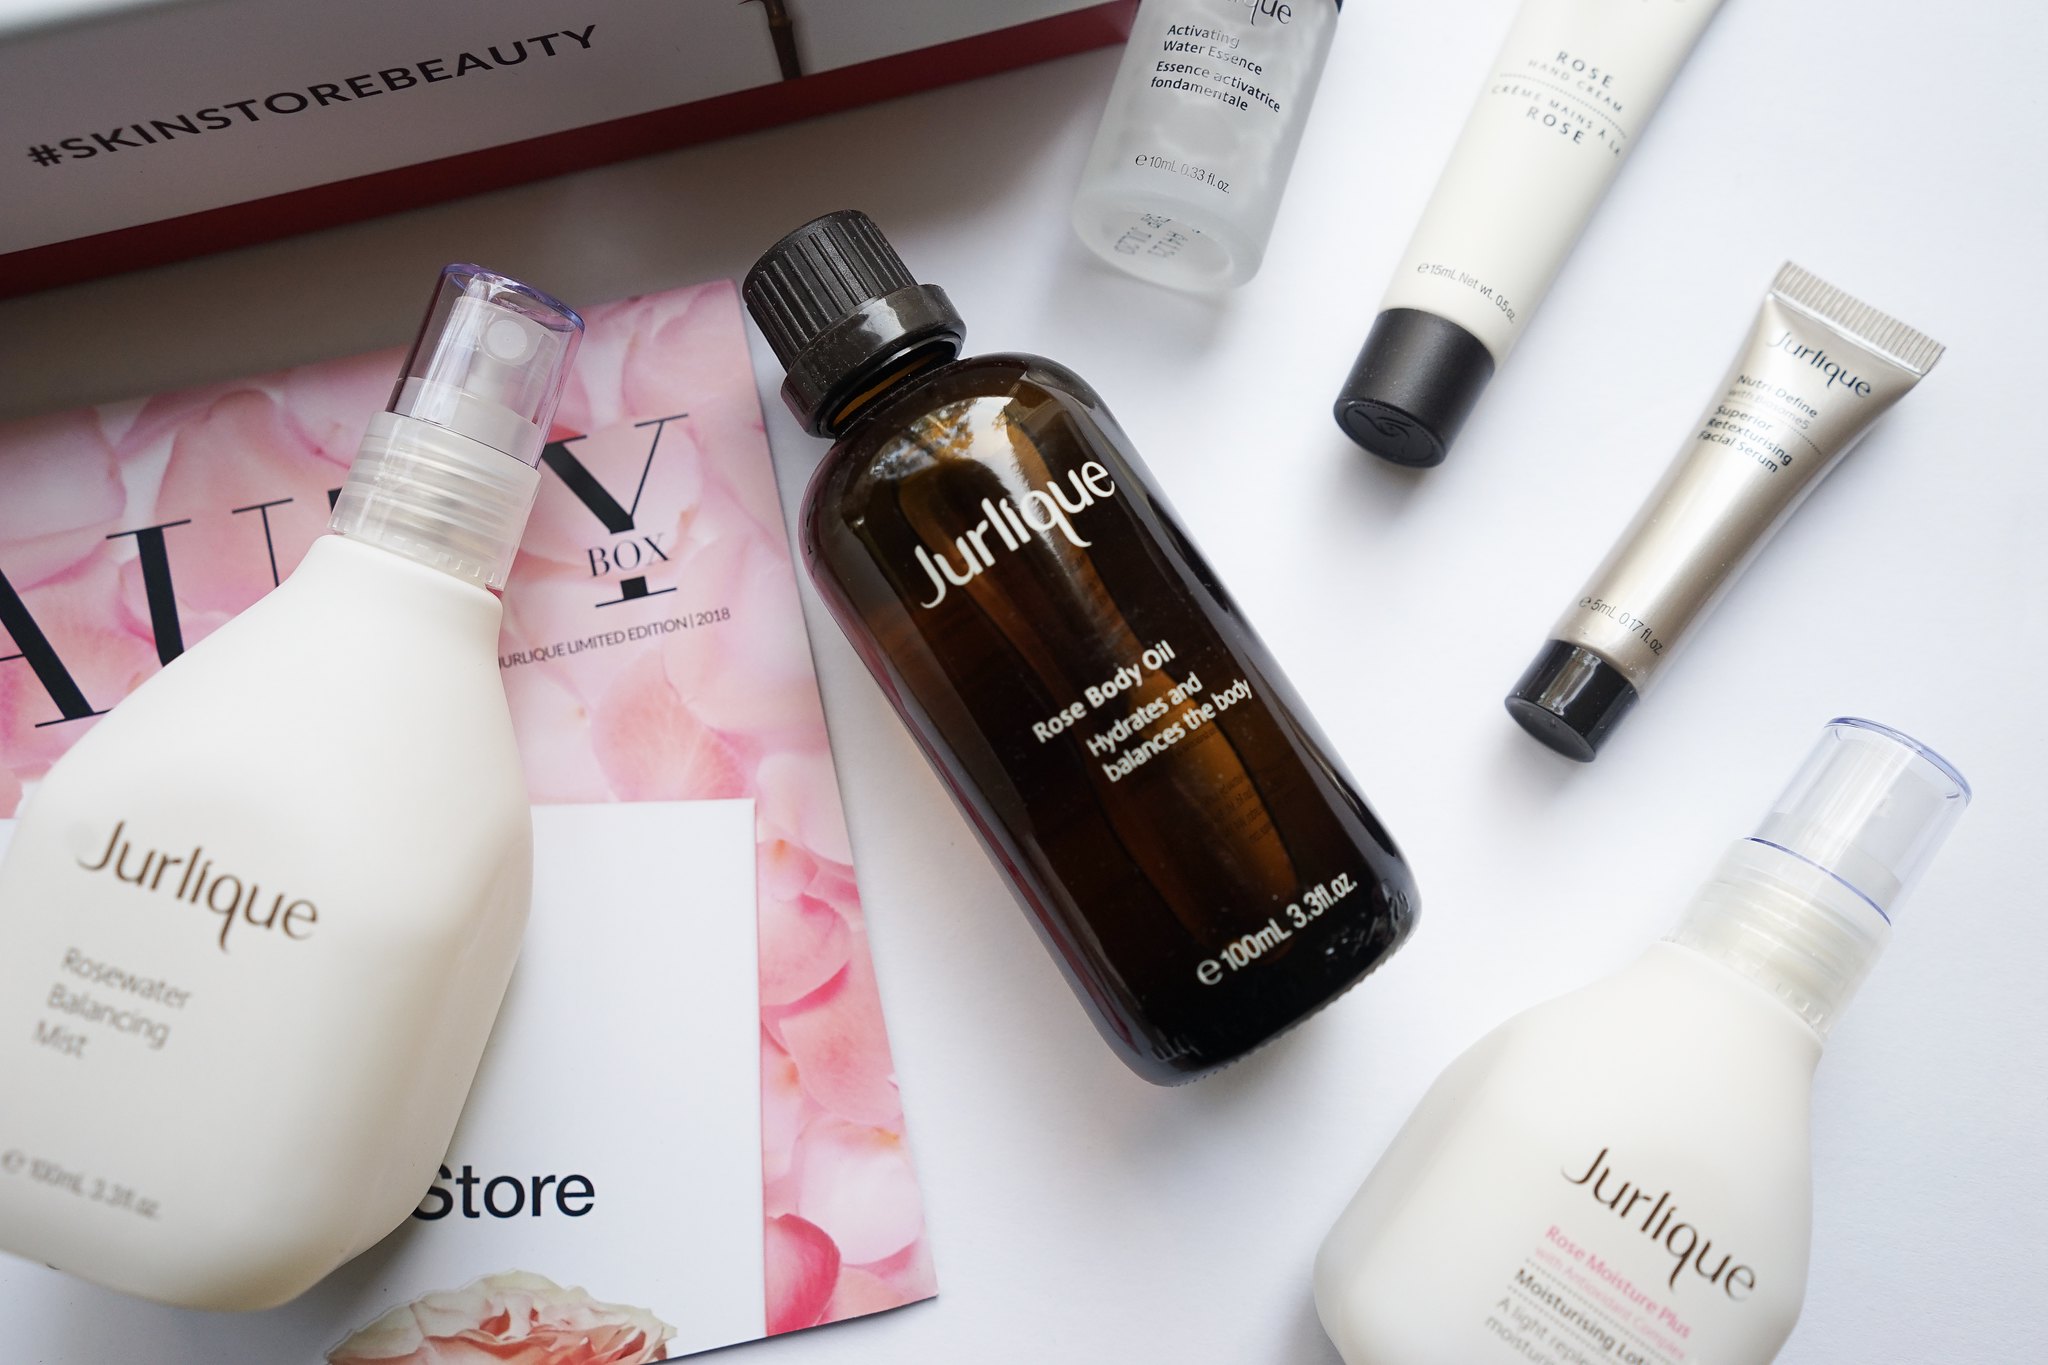 Jurlique, SkinStore, Beauty Box, Limited Edition, Skincare, Bodycare, Luxury Beauty, Mom beauty, Mom blogger, Mommy blog